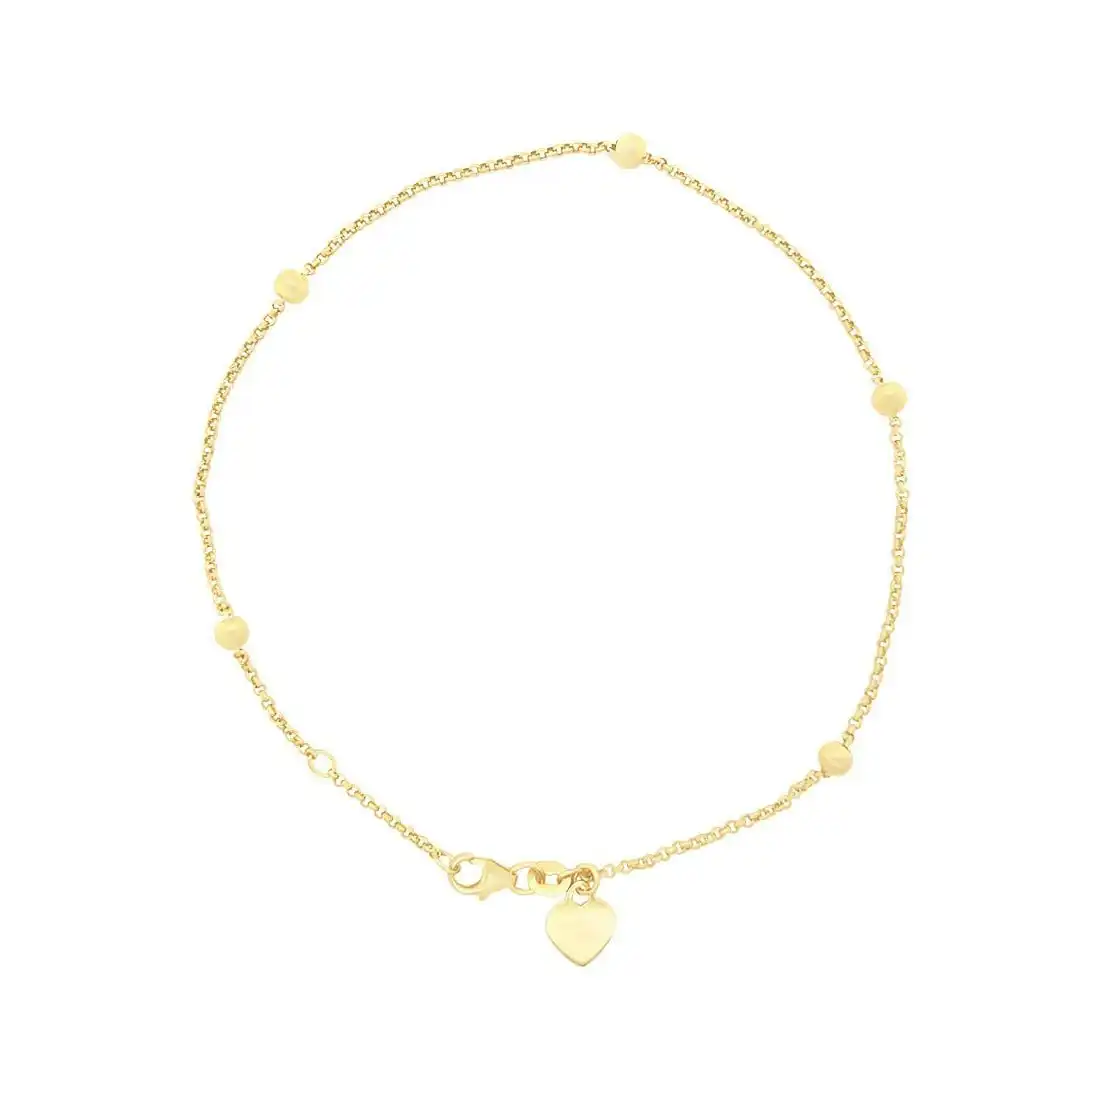 Heart Charm Belcher Anklet in 9ct Yellow Gold Silver Infused 27cm